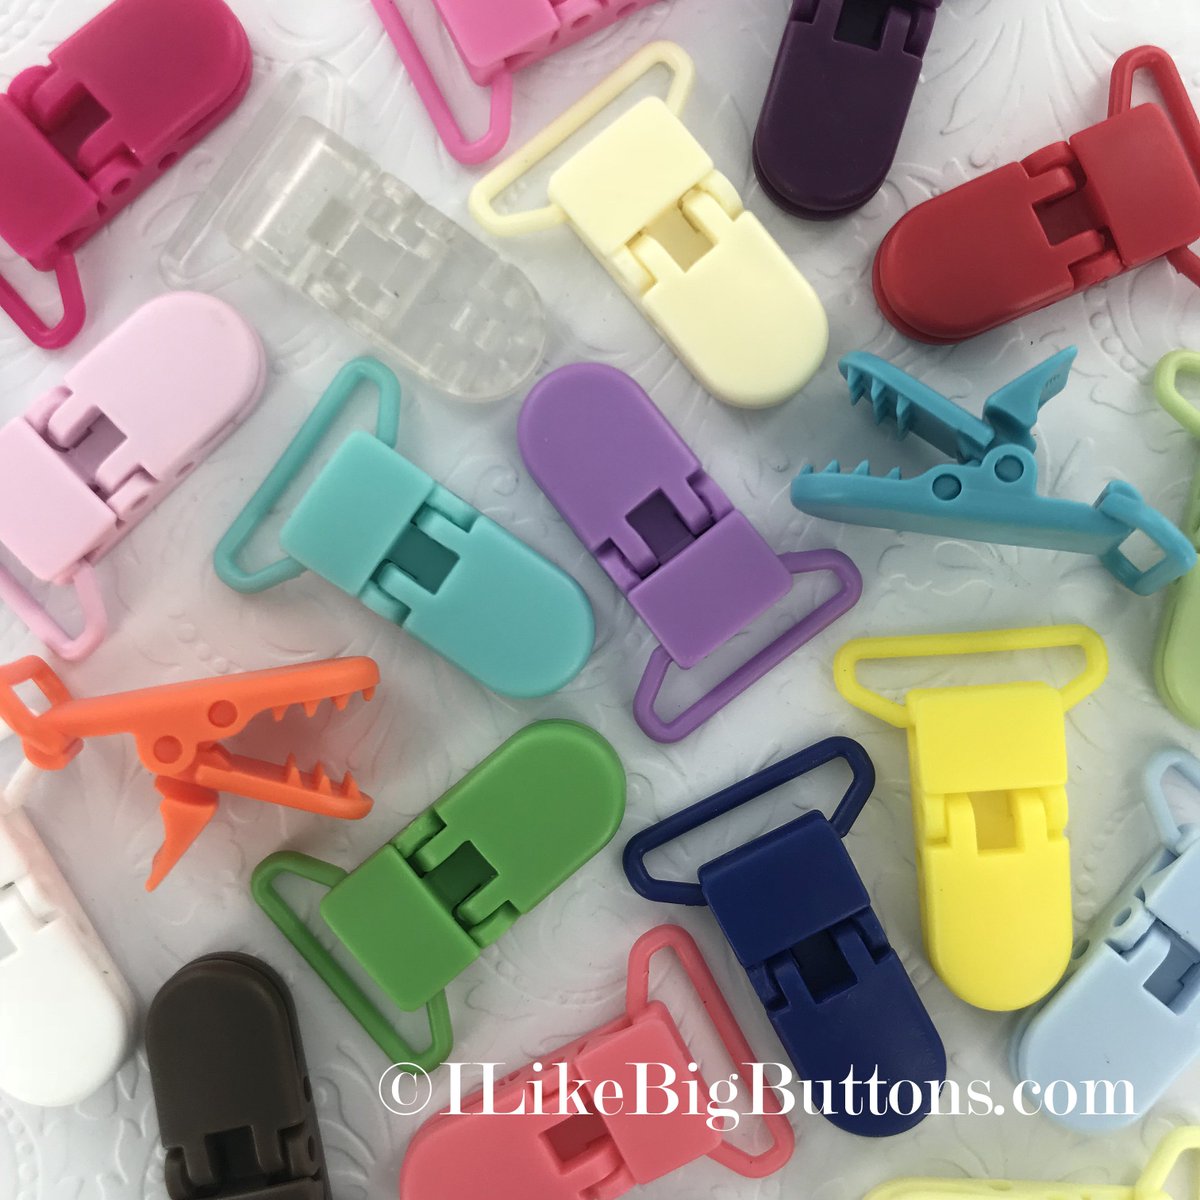 I Like Big Buttons! KAM Plastic Pacifier Clips

* In 22 Great Colors

LINK: ilikebigbuttons.com/collections/pa…

#ilikebigbuttons #pacifierclips #pacifiersupplies #plasticpacifierclips #suspenderclips #craftsupplies #shopilikebigbuttons #babysupplies #babies #babygifts #babyitems #KAMclips